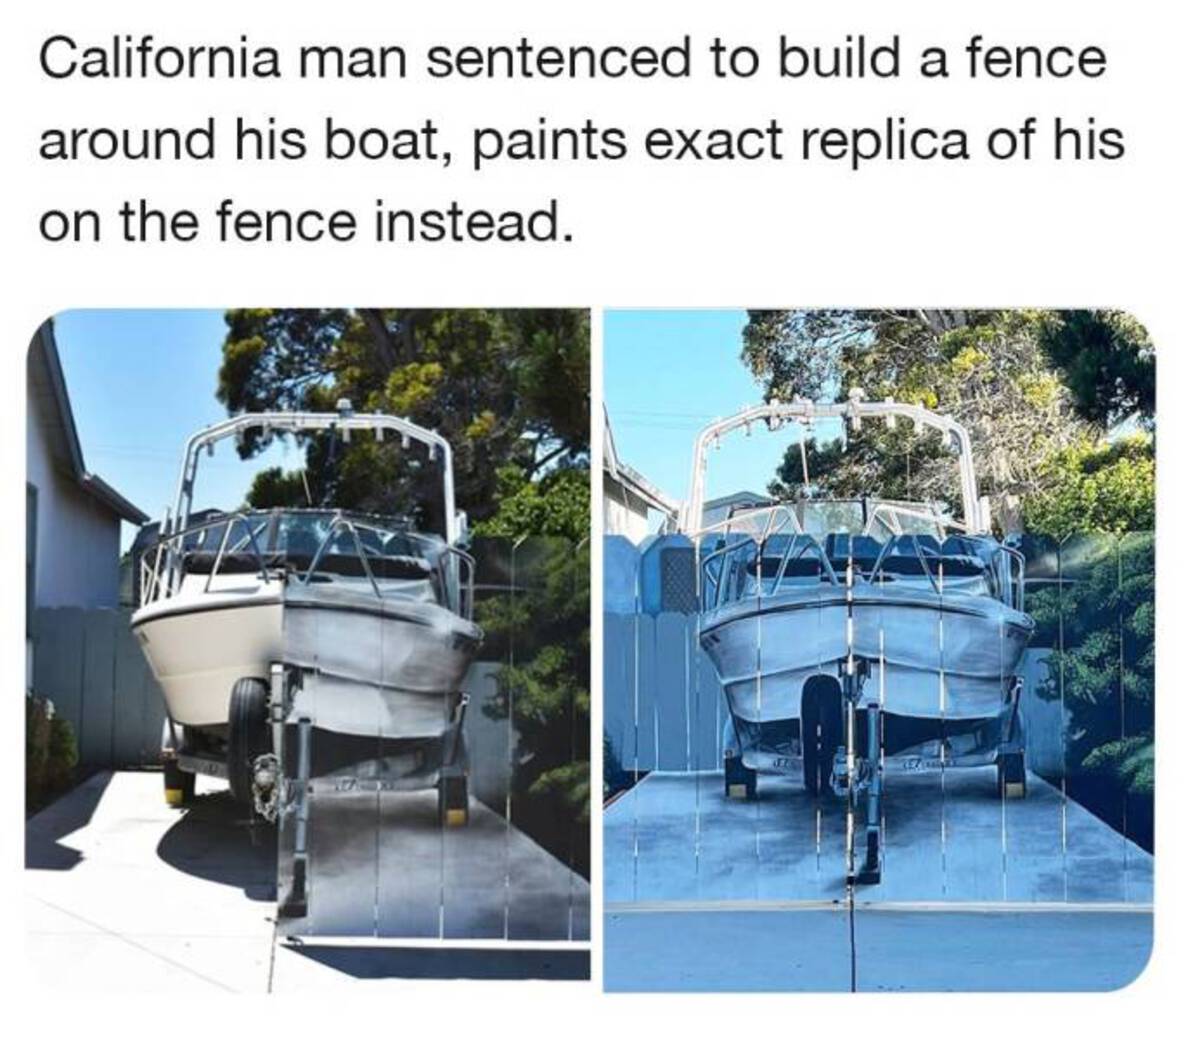 boat mural on fence - California man sentenced to build a fence around his boat, paints exact replica of his on the fence instead.